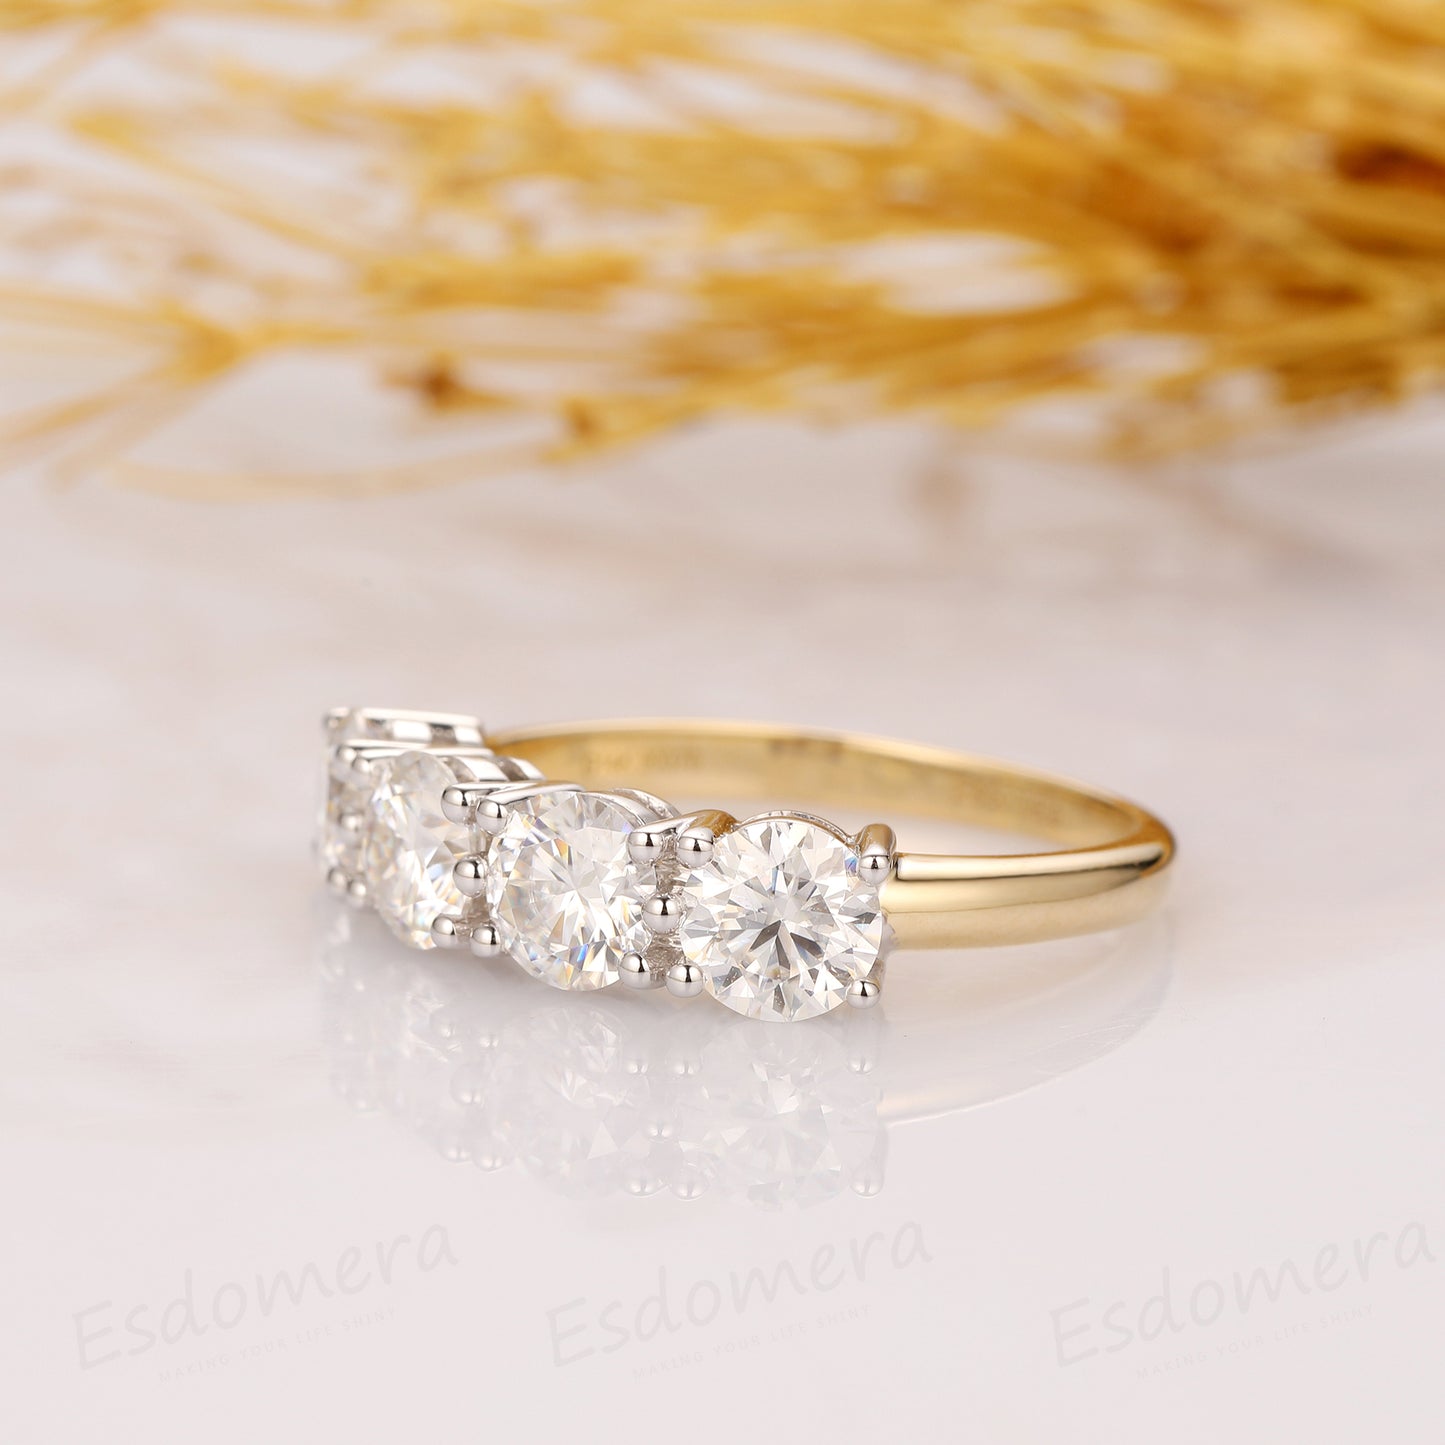 Moissanite 4 Stone Ring, Solid 14k Two Tone Gold Ring, Promise Anniversary Ring, Wedding Ring